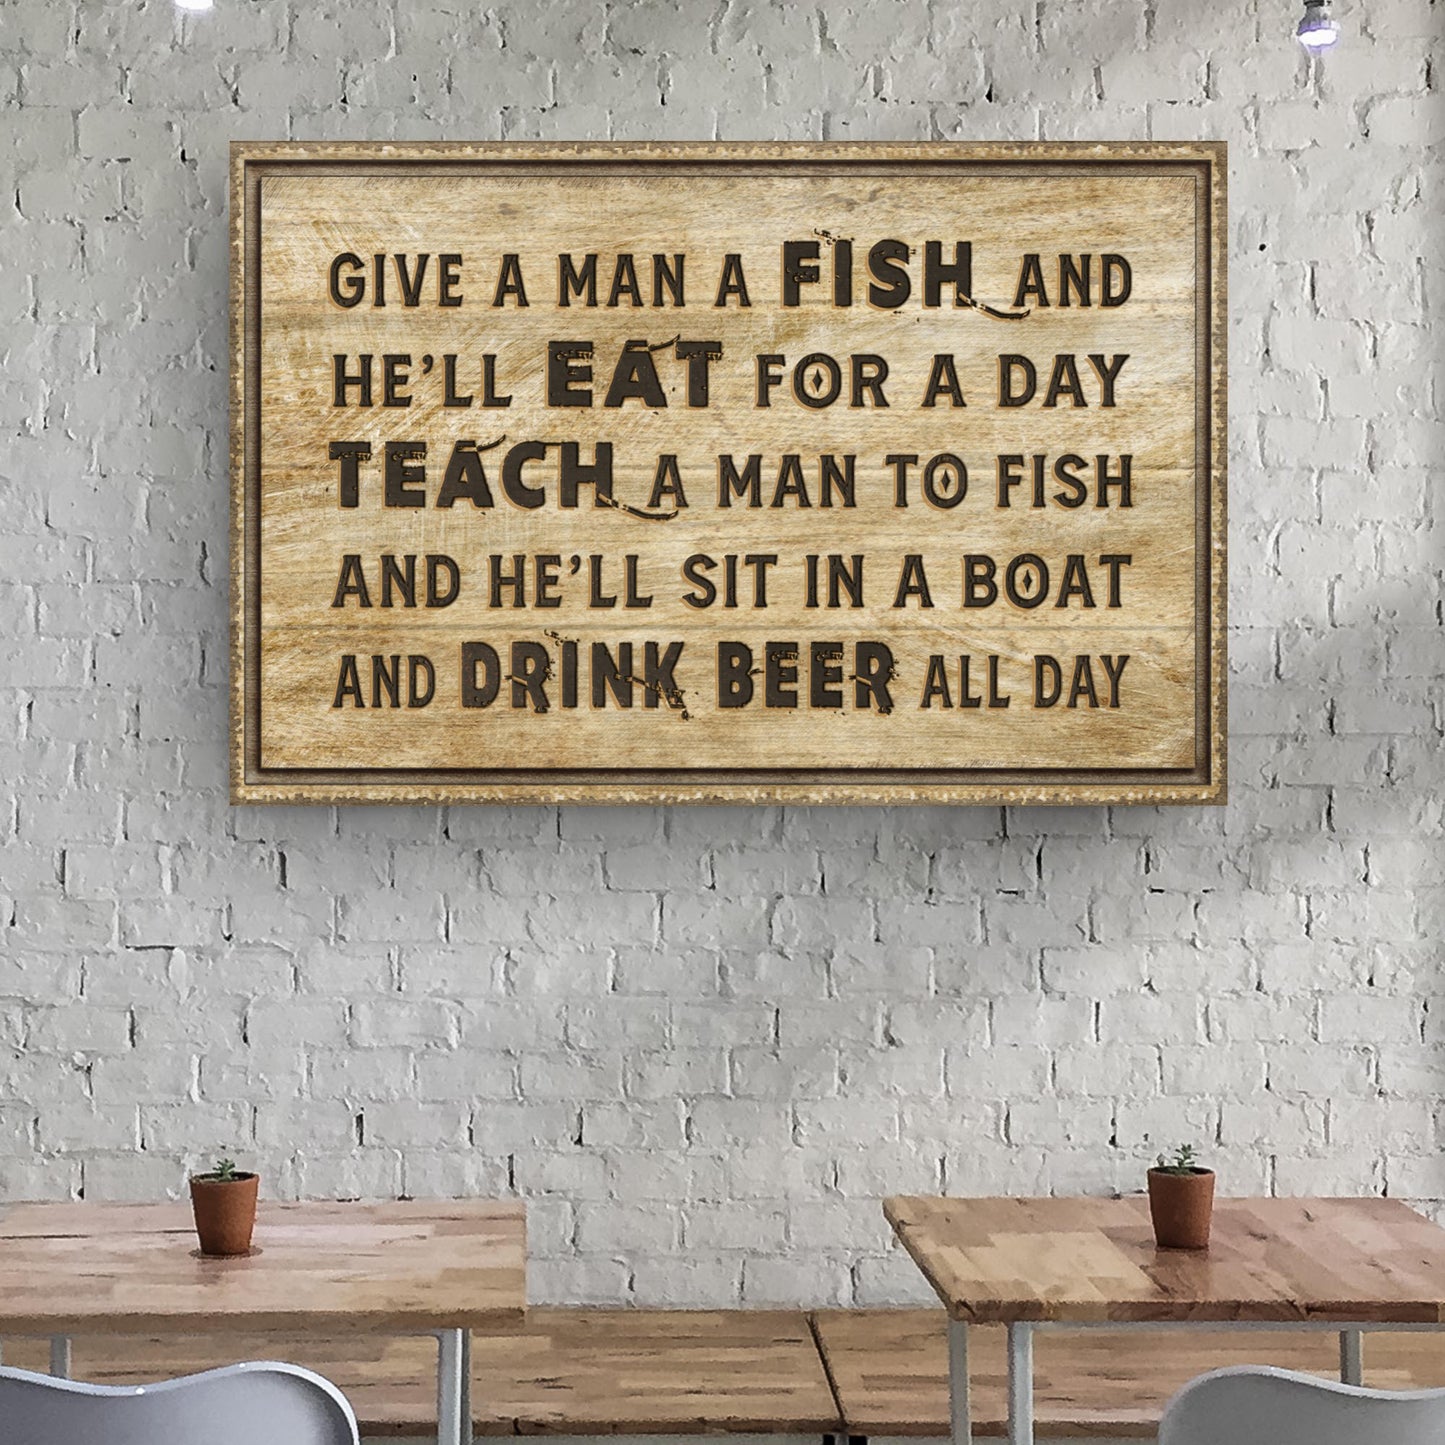 Give A Man A Fish Sign - Image by Tailored Canvases